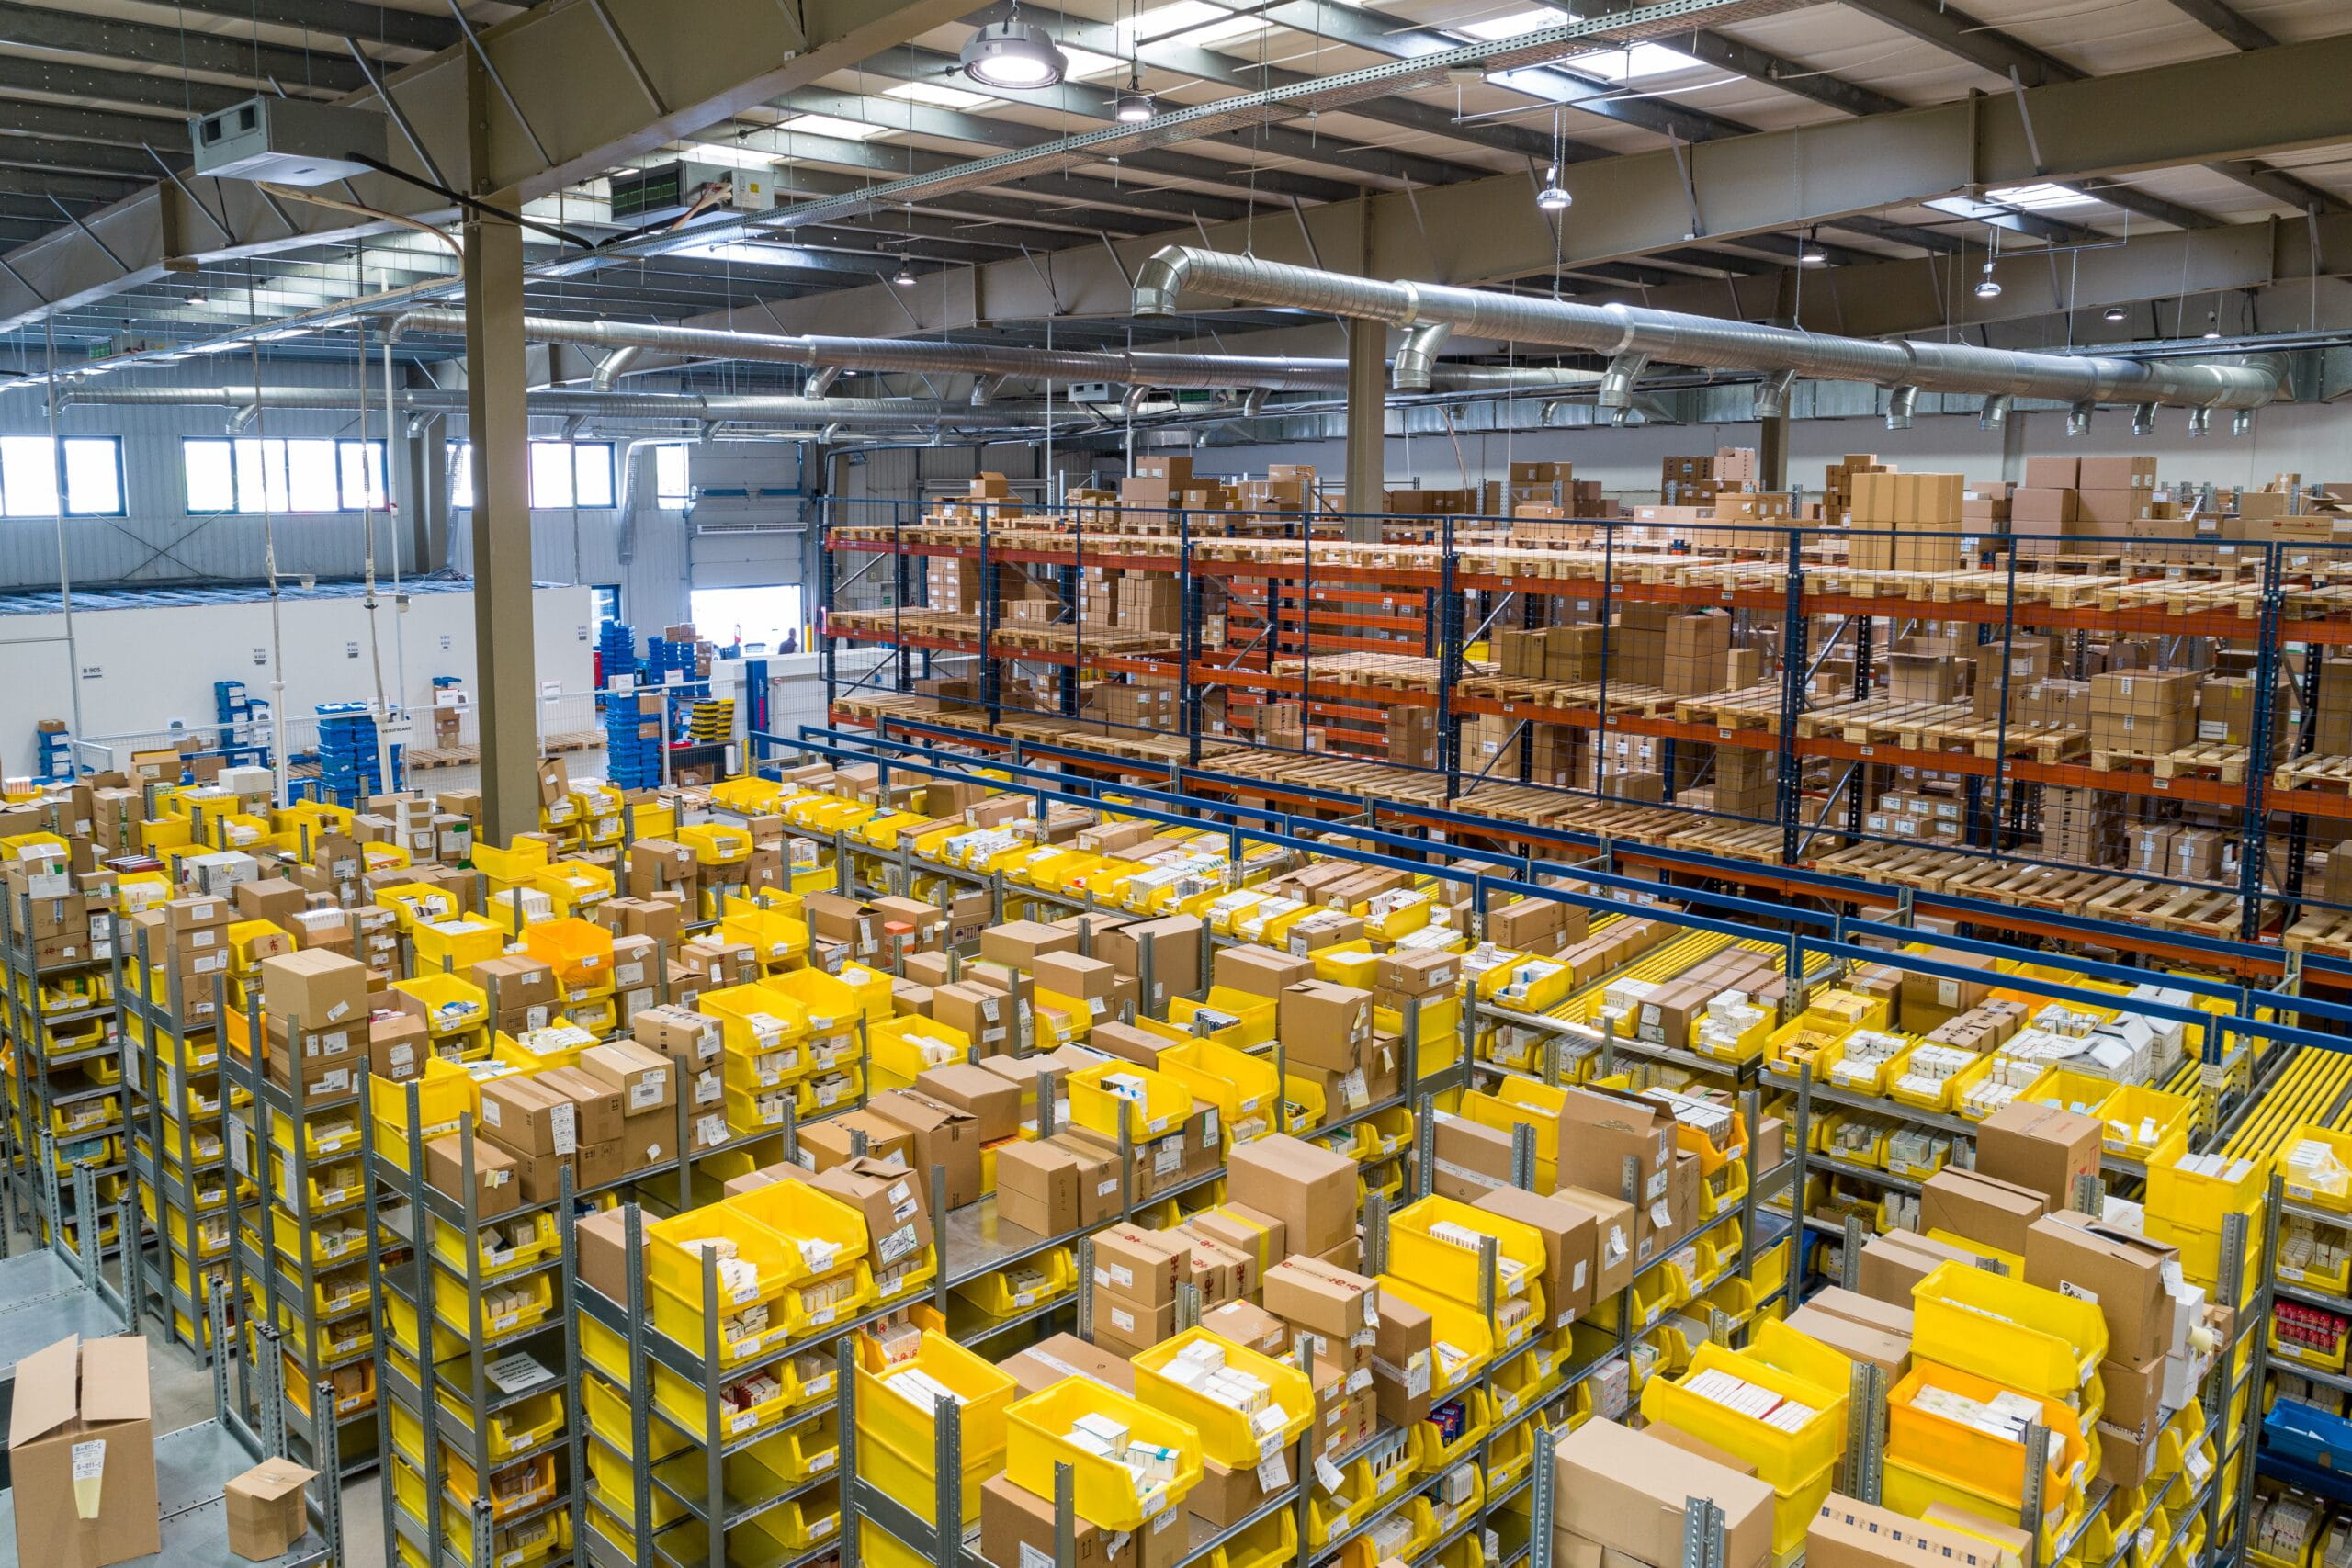 An overhead shot of a filled warehouse in action